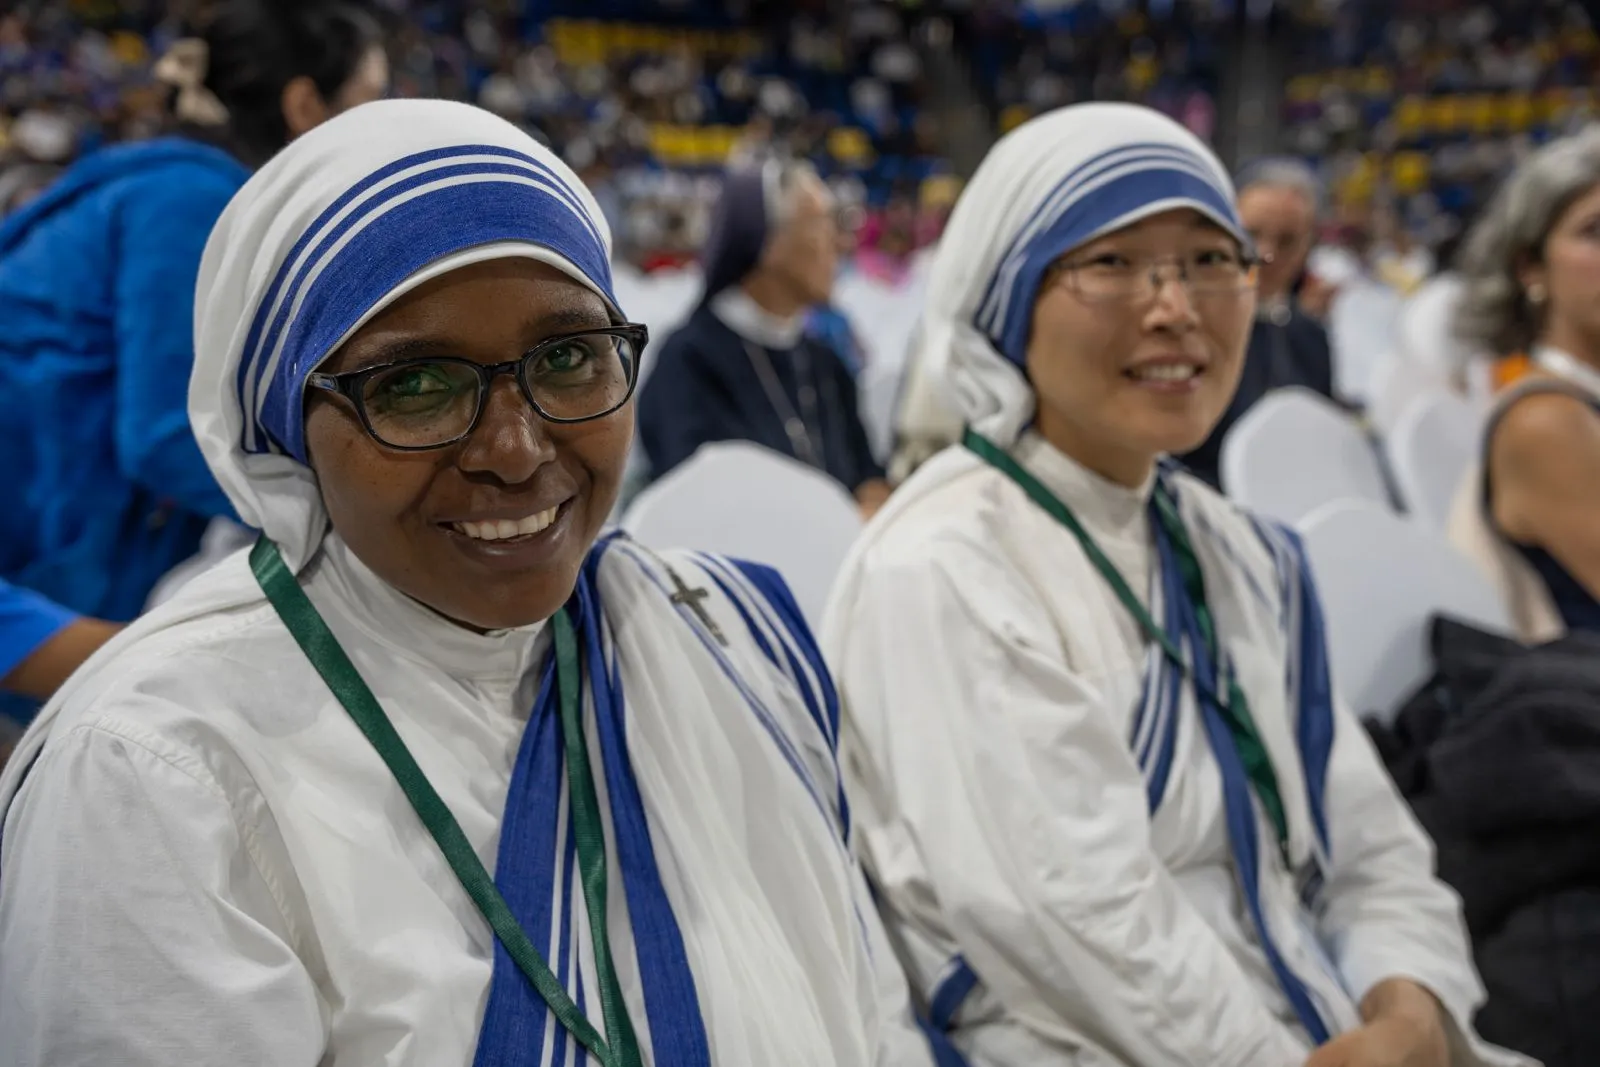 Missionaries of Charity came to greet Pope Francis during his trip to Ulaanbaatar, Mongolia Sept. 1-4.?w=200&h=150